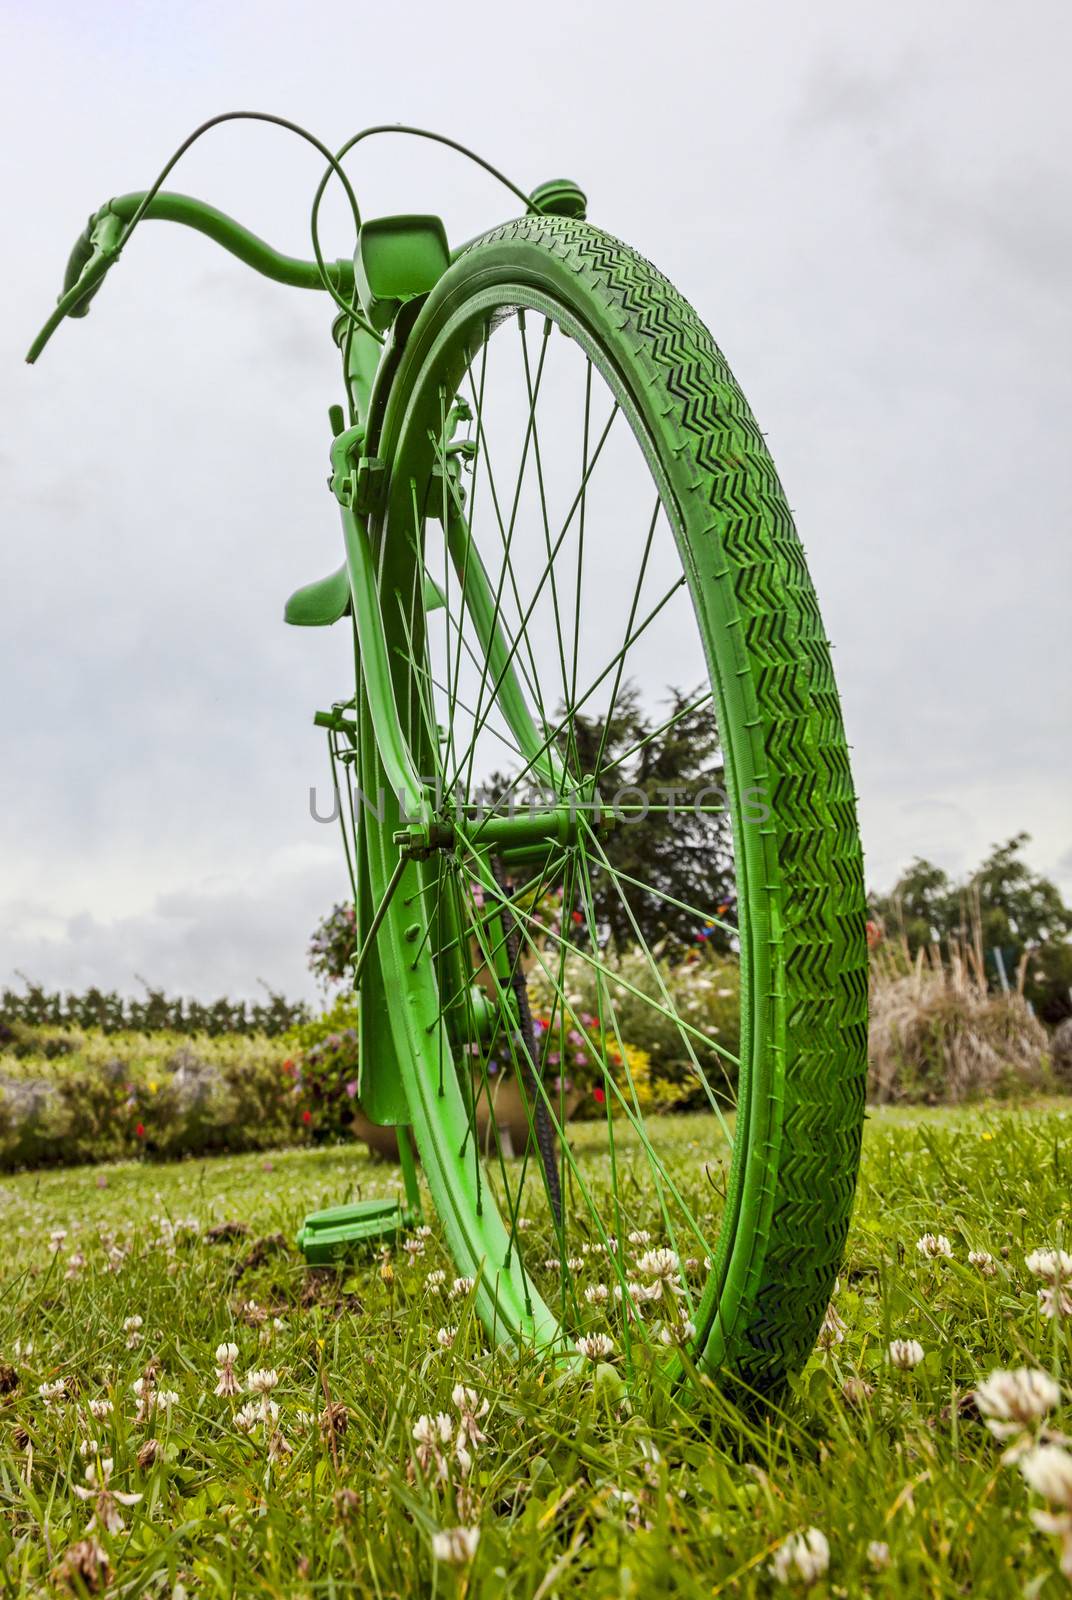 Green vintage bicycle in a green field.